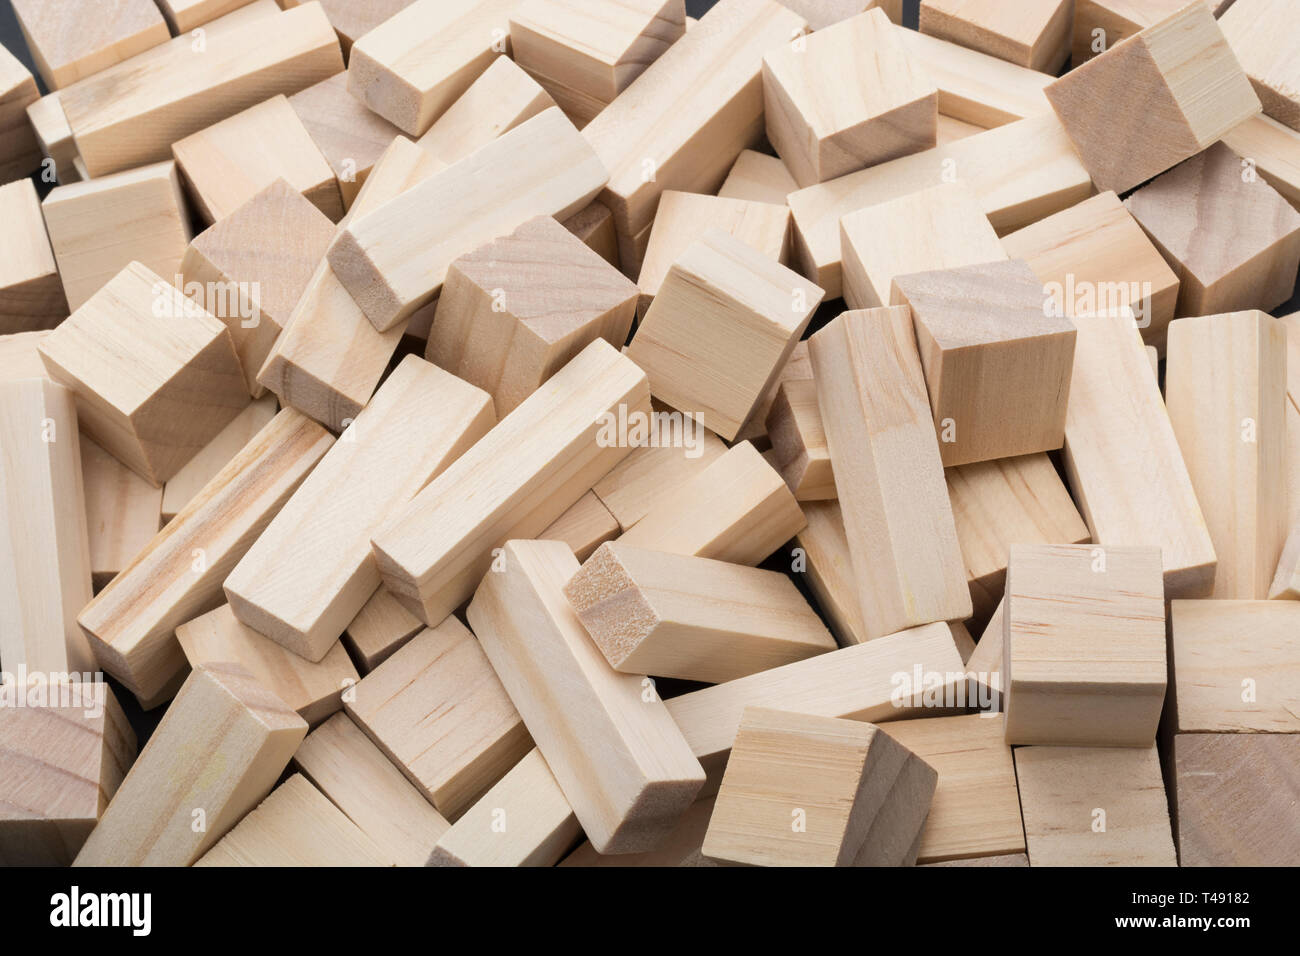 Small wooden bricks scattered in a disorganised pile. Metaphor chaos, US bank collapse, untidy, jumbled up, mixed up, in a muddle, confused thoughts. Stock Photo